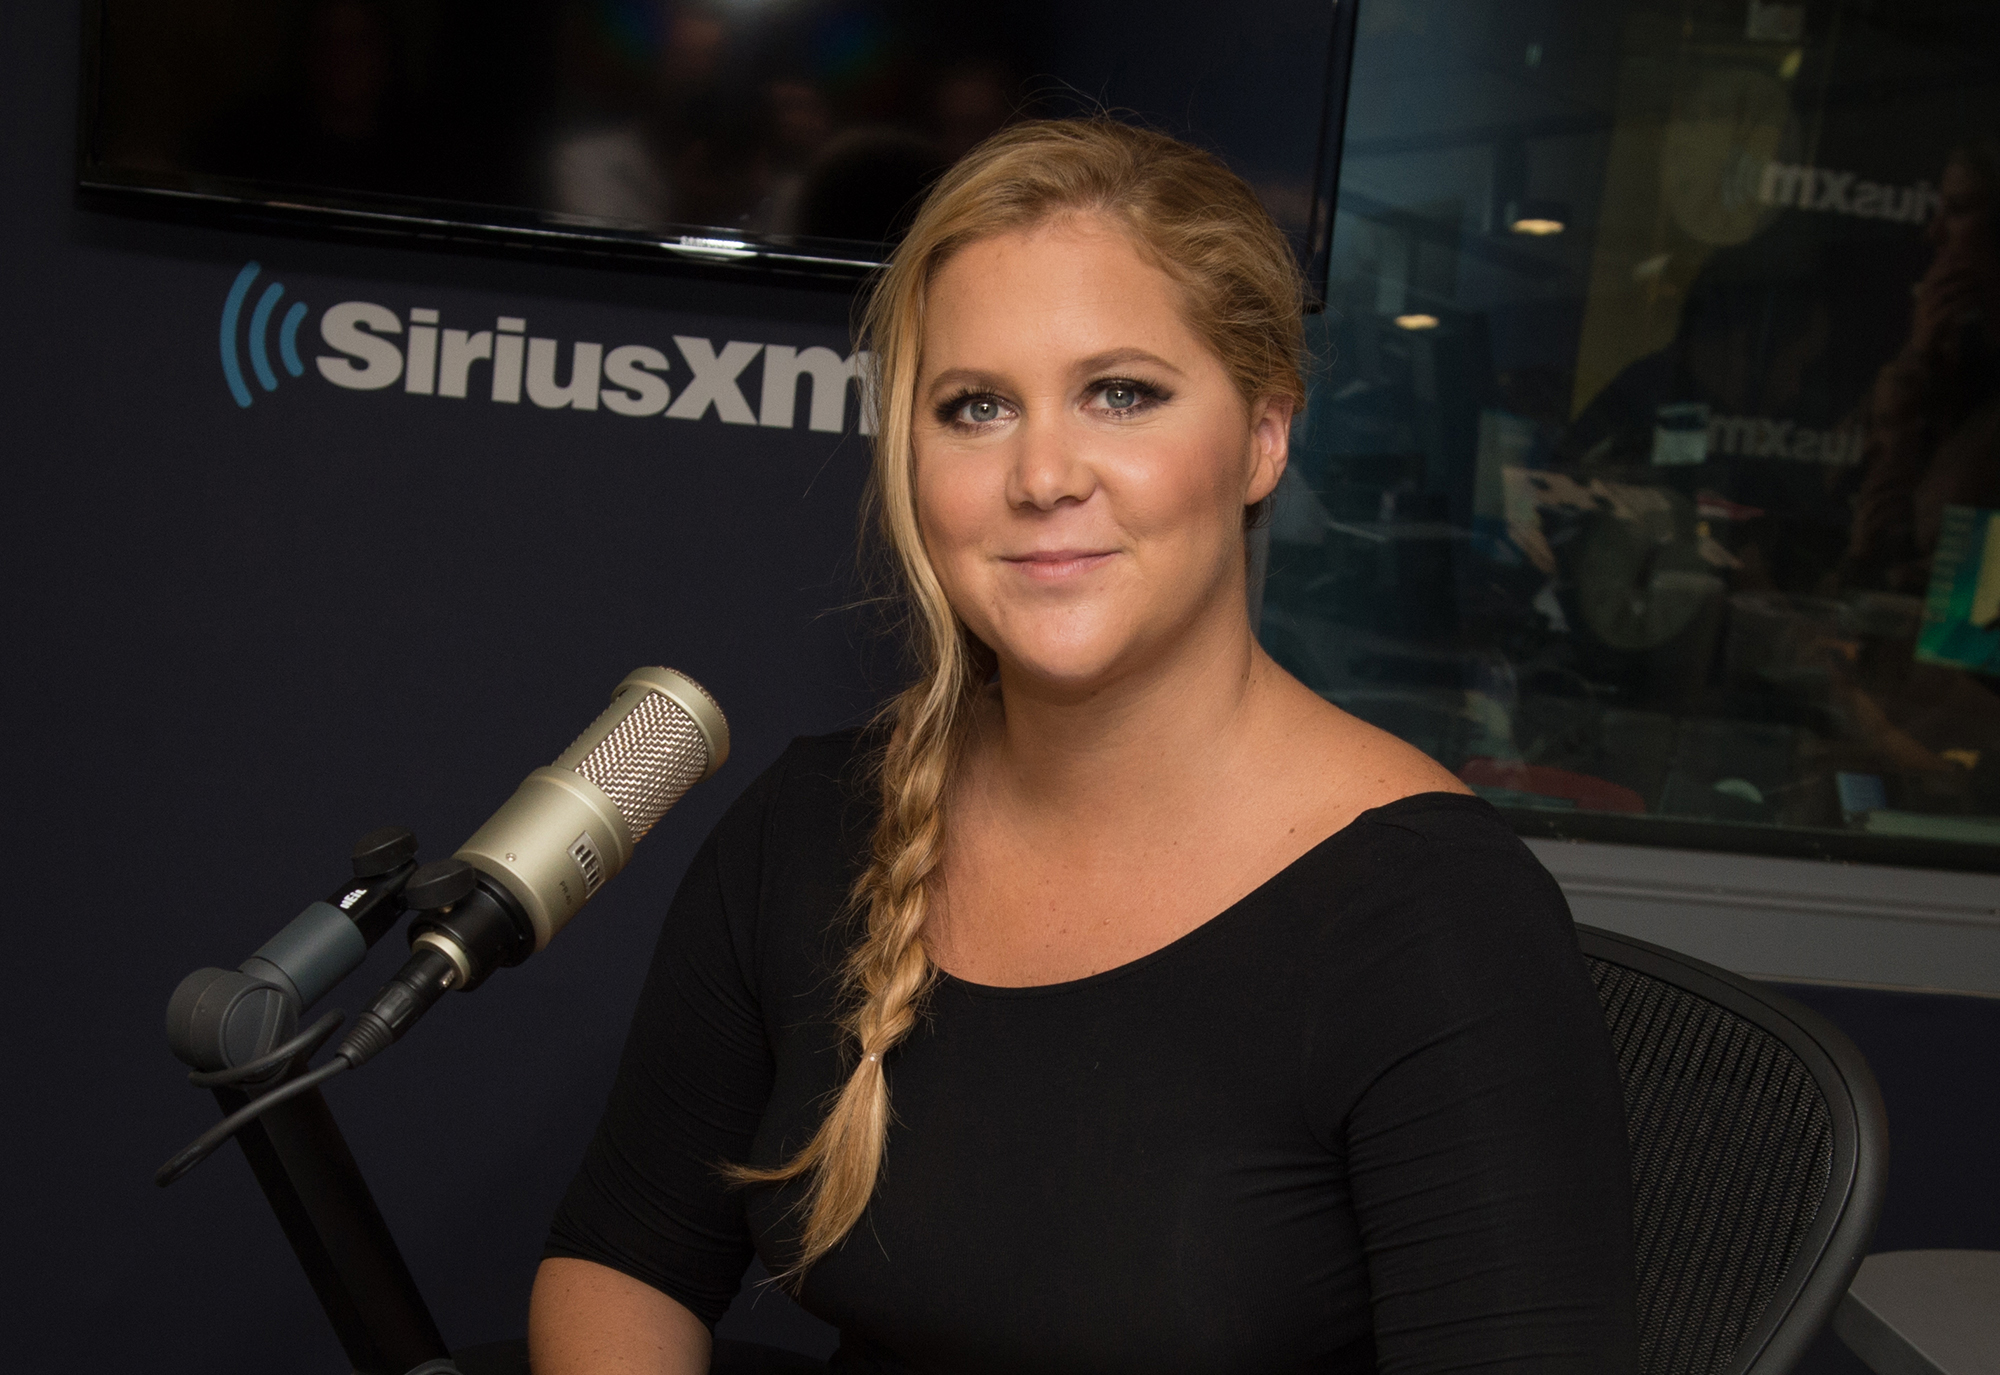 Amy Schumer visits SiriusXM at SiriusXM Studio on August 23, 2016 in New York City. (Photo by J. Kempin/Getty Images)